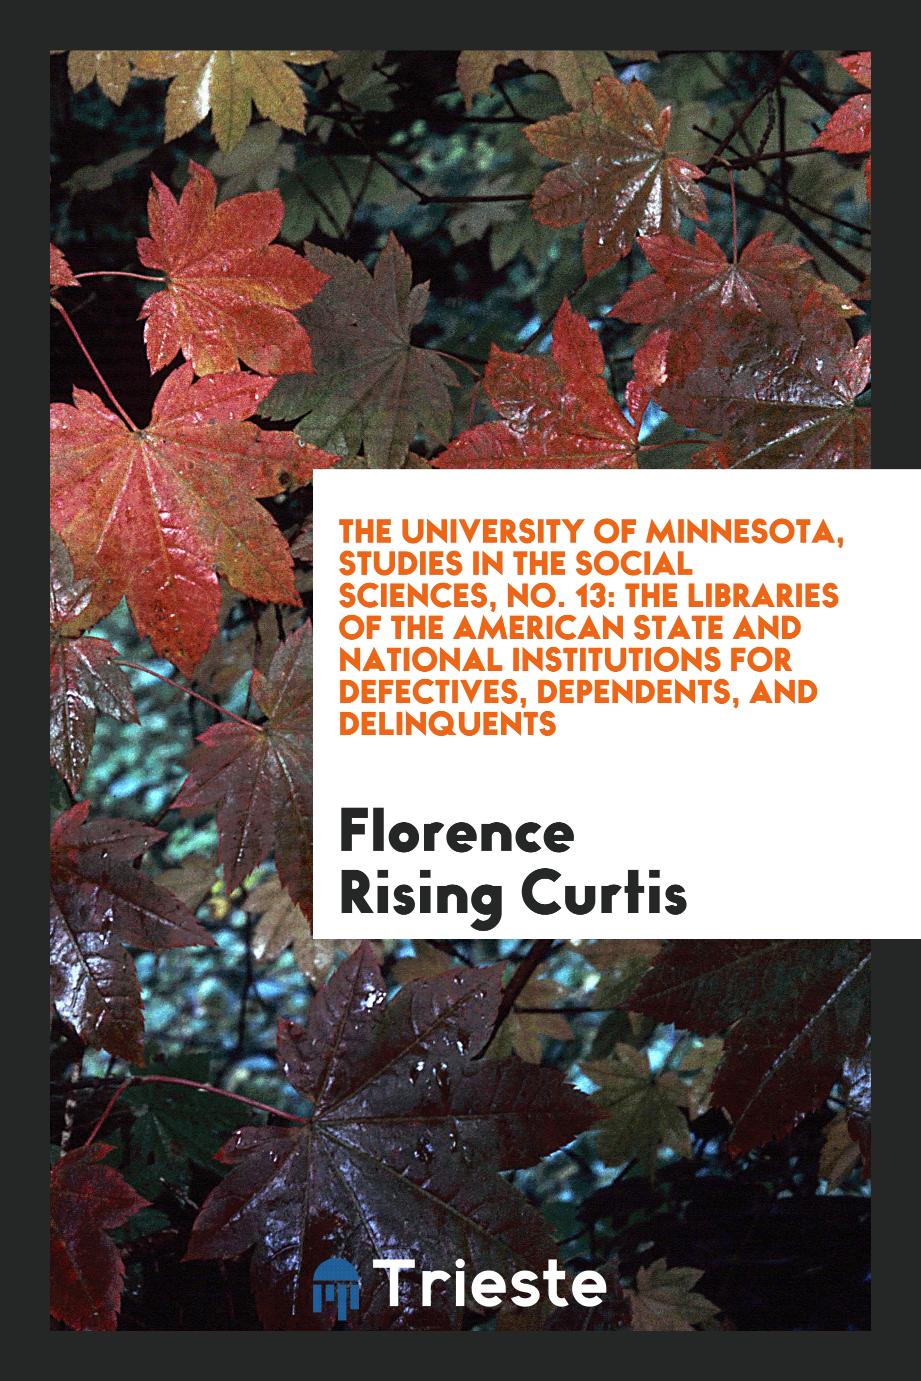 The University of Minnesota, Studies in the Social Sciences, No. 13: The Libraries of the American State and National Institutions for Defectives, Dependents, and Delinquents